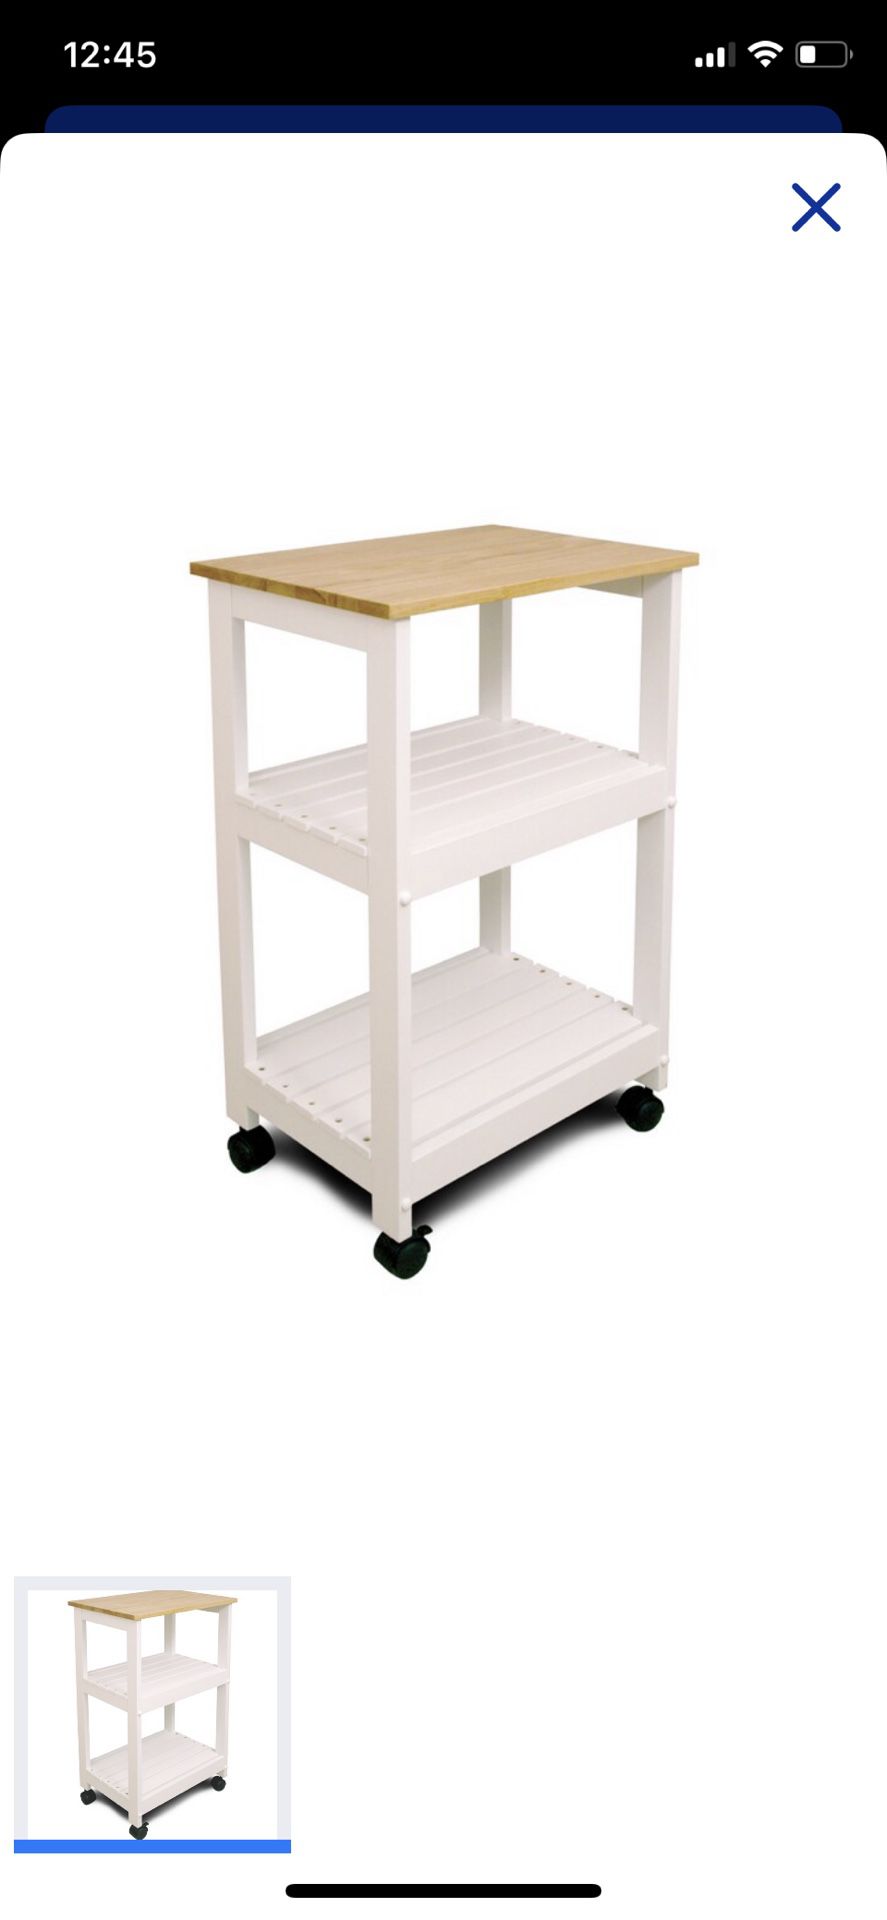 Black Wood Base With Rubberwood Wood Top Rolling Kitchen Cart (21-in x 15.25 x 34.25-in